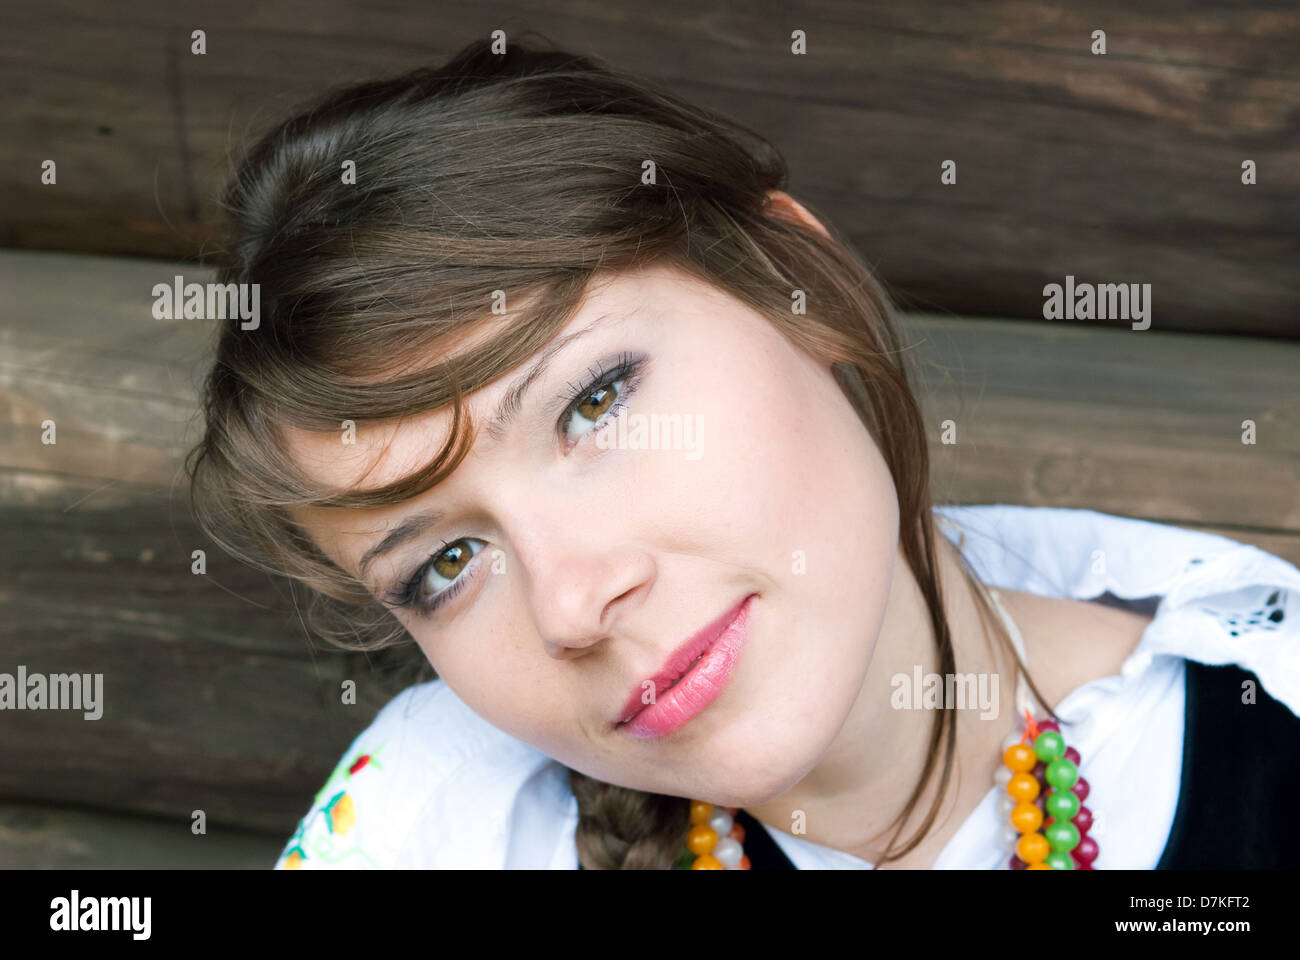 Portrait of a pretty young woman Stock Photo